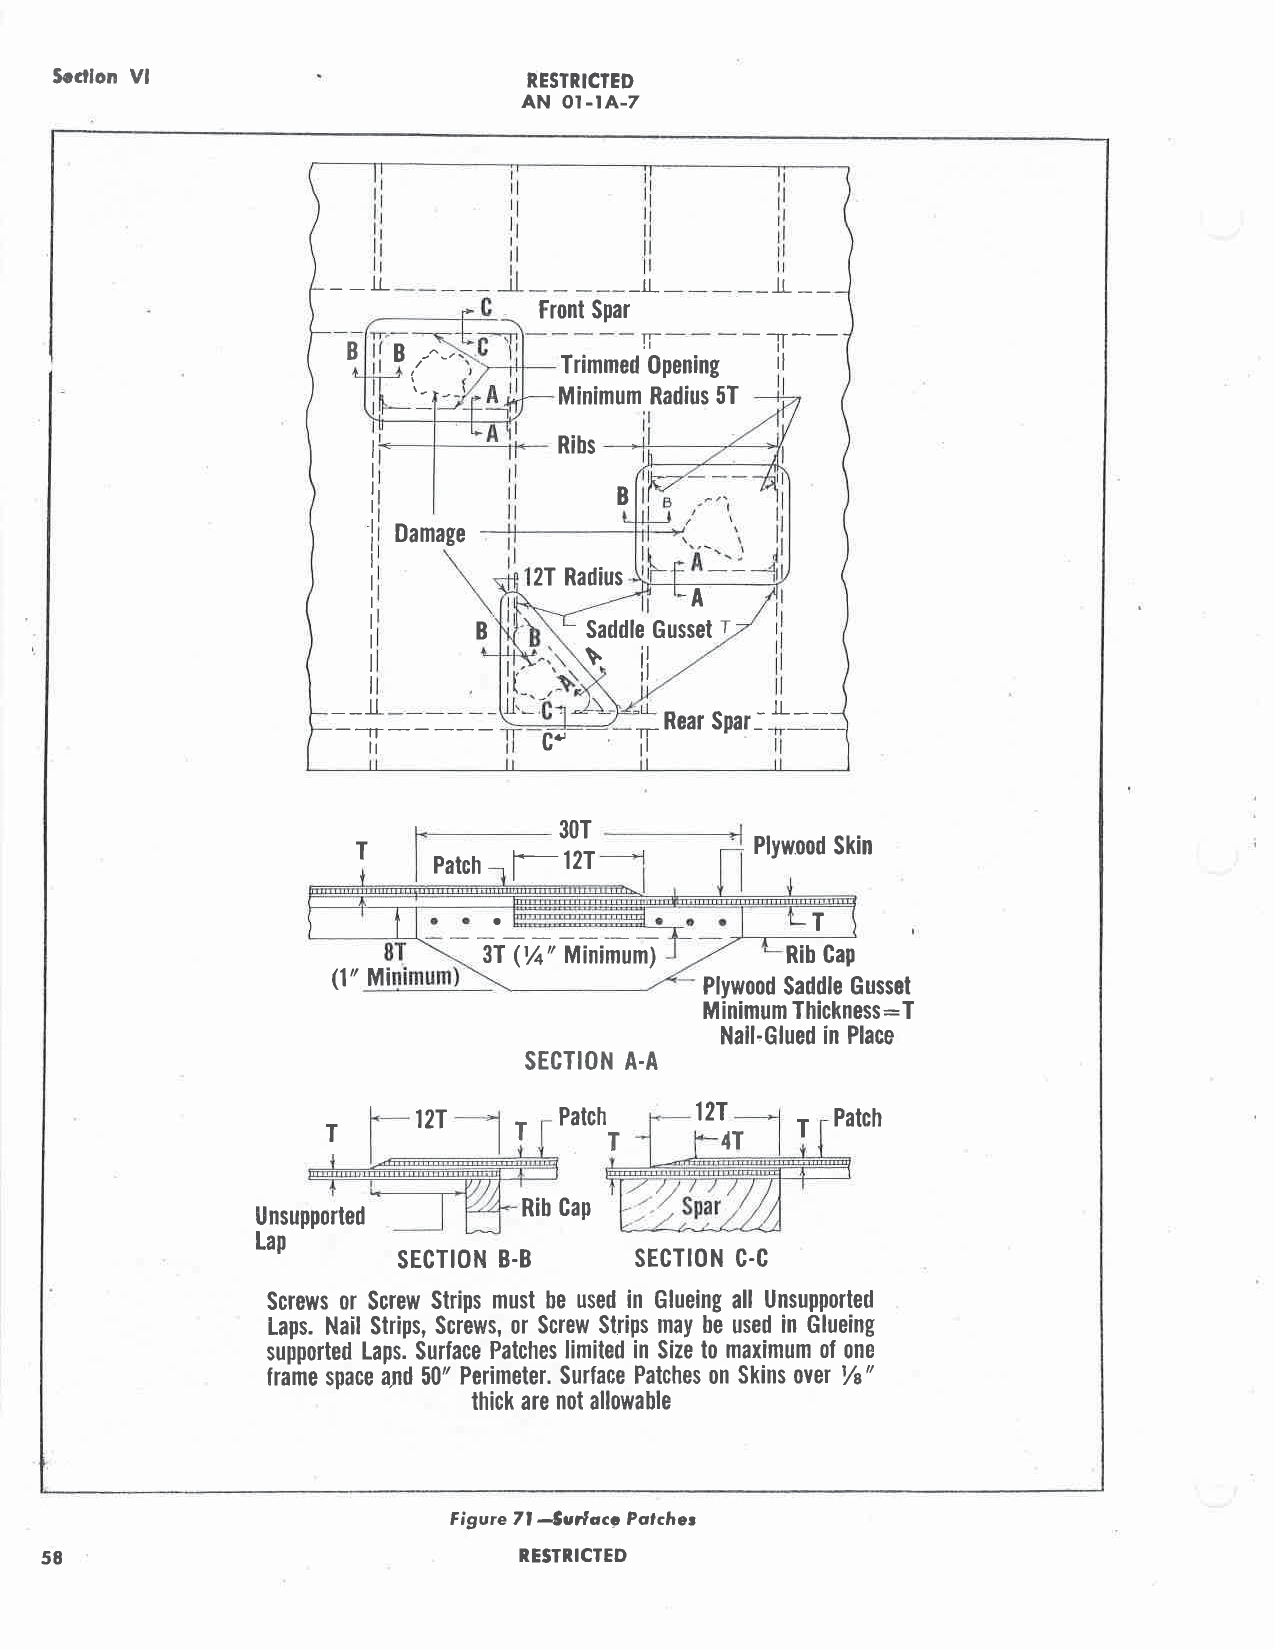 Sample page 64 from AirCorps Library document: Repair of Wood Aircraft Structures - Engineering Handbook